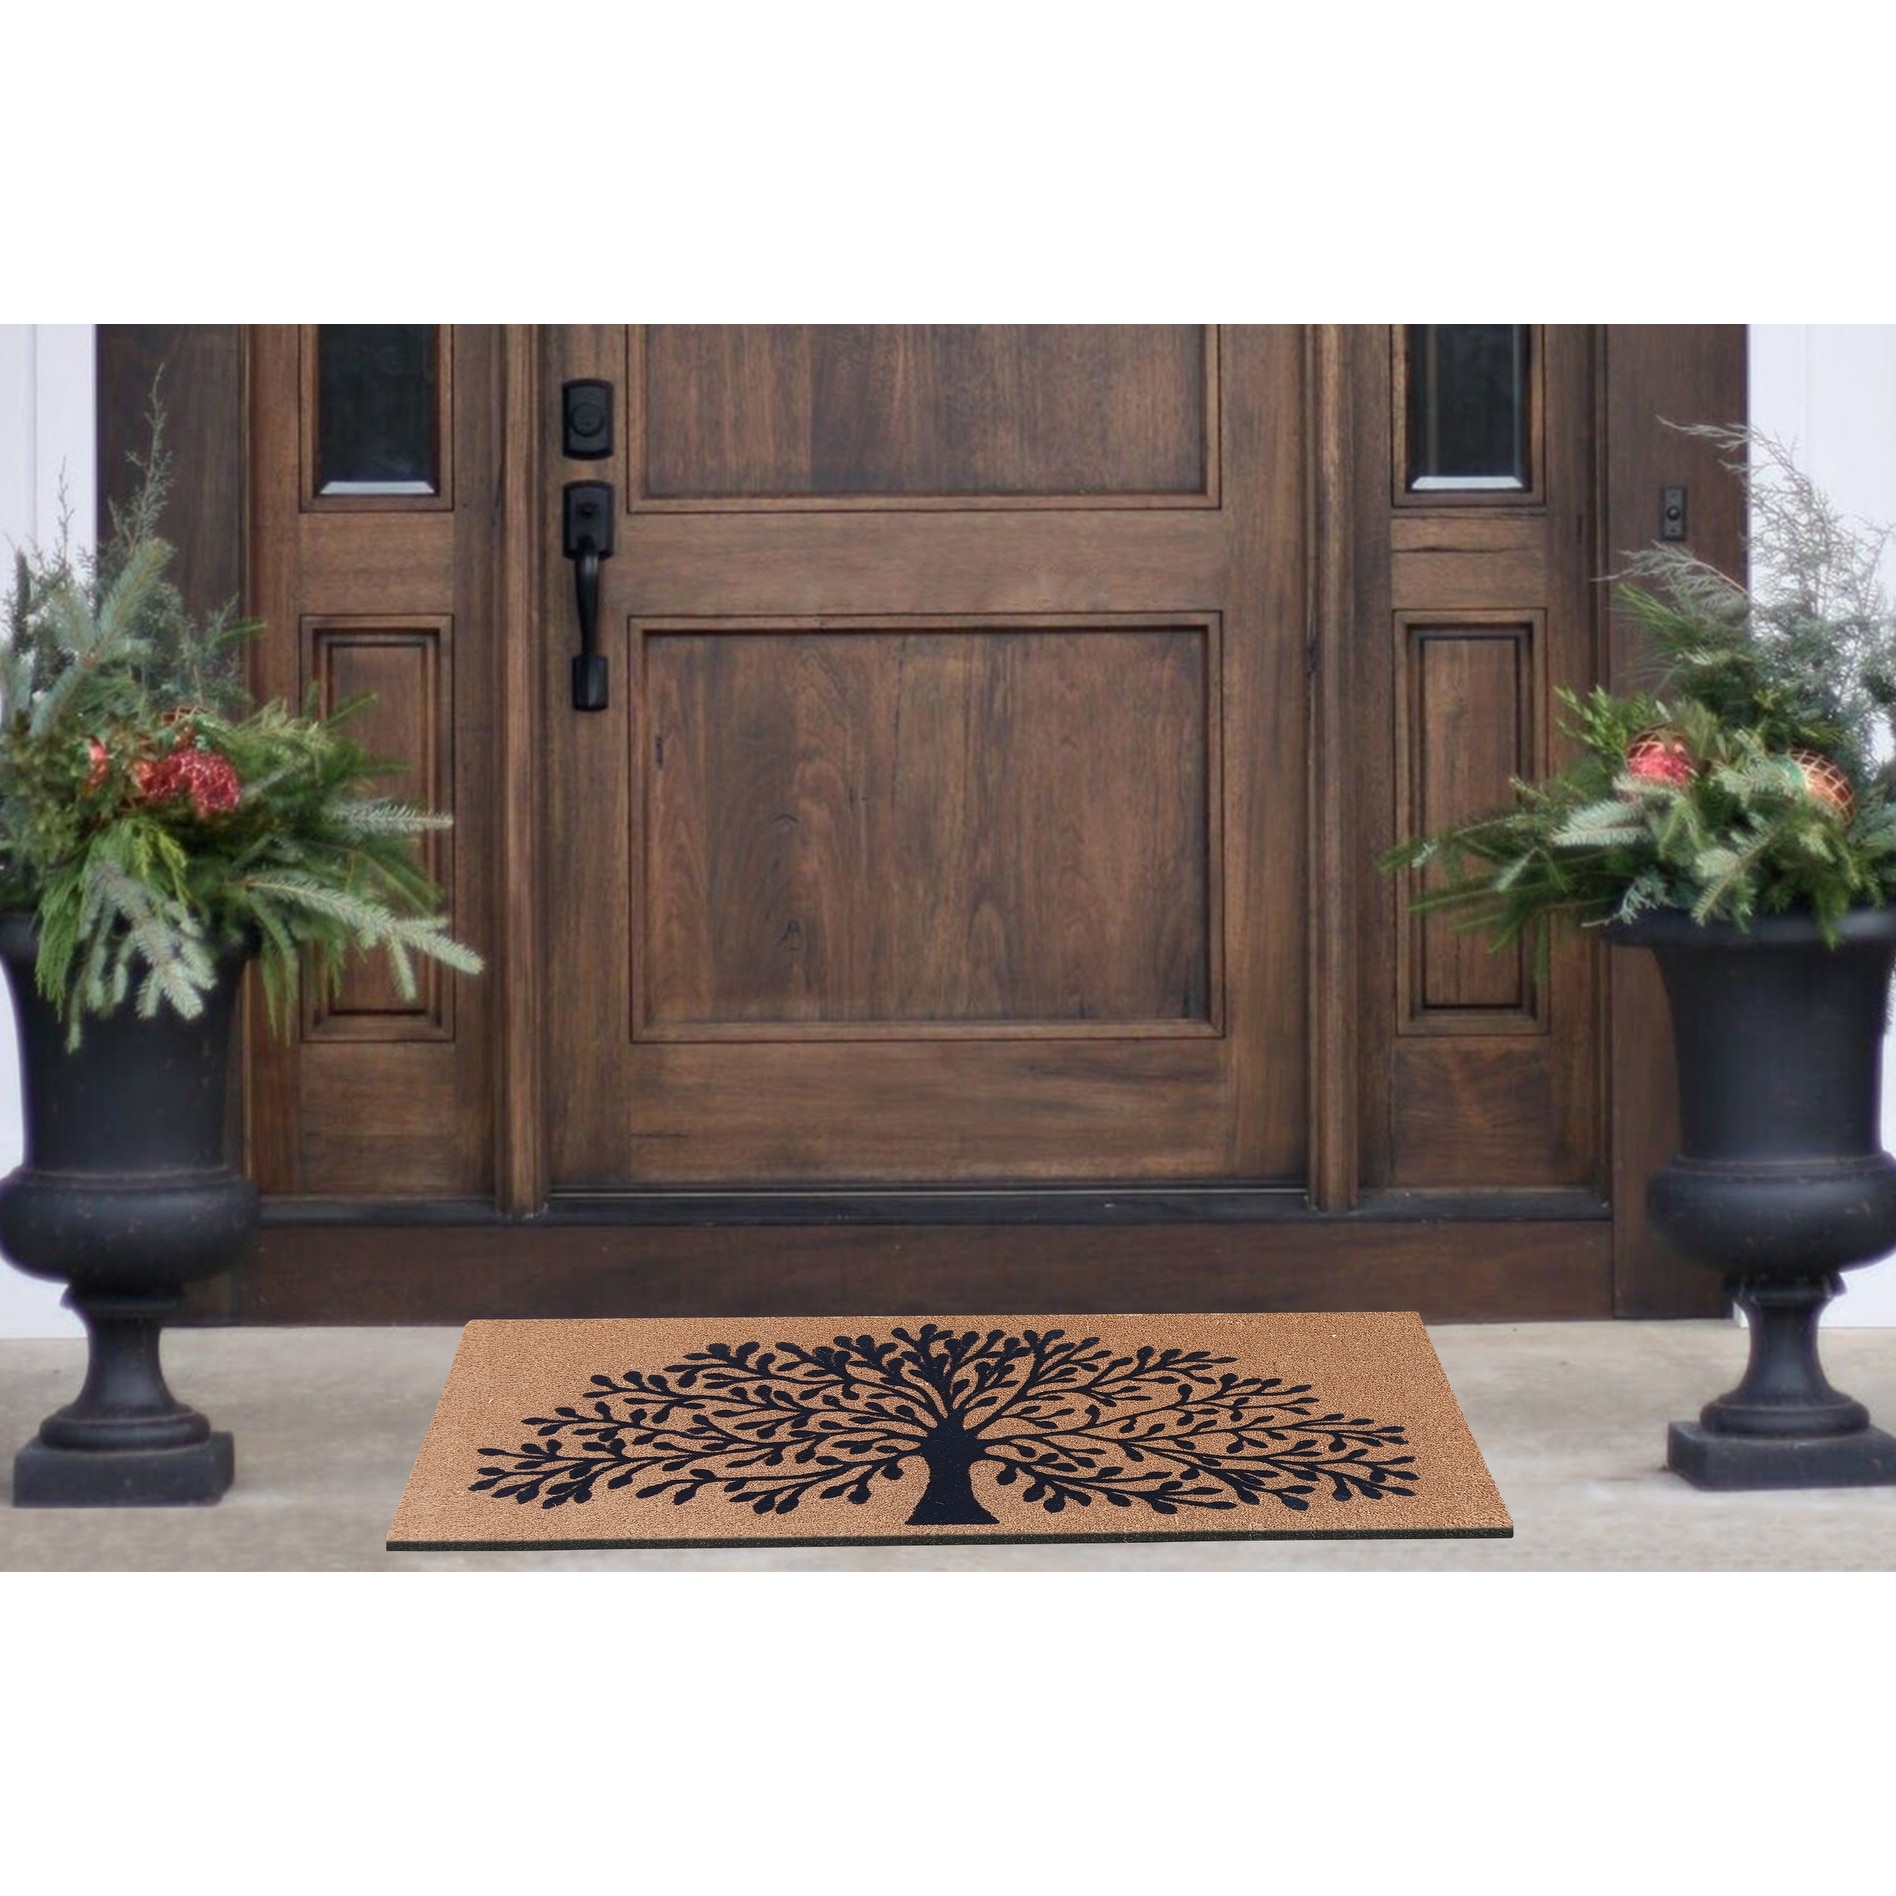 A1HC Rubber and Coir Large Heavy-Duty Outdoor Doormat, 23X38 Black - On  Sale - Bed Bath & Beyond - 32537704